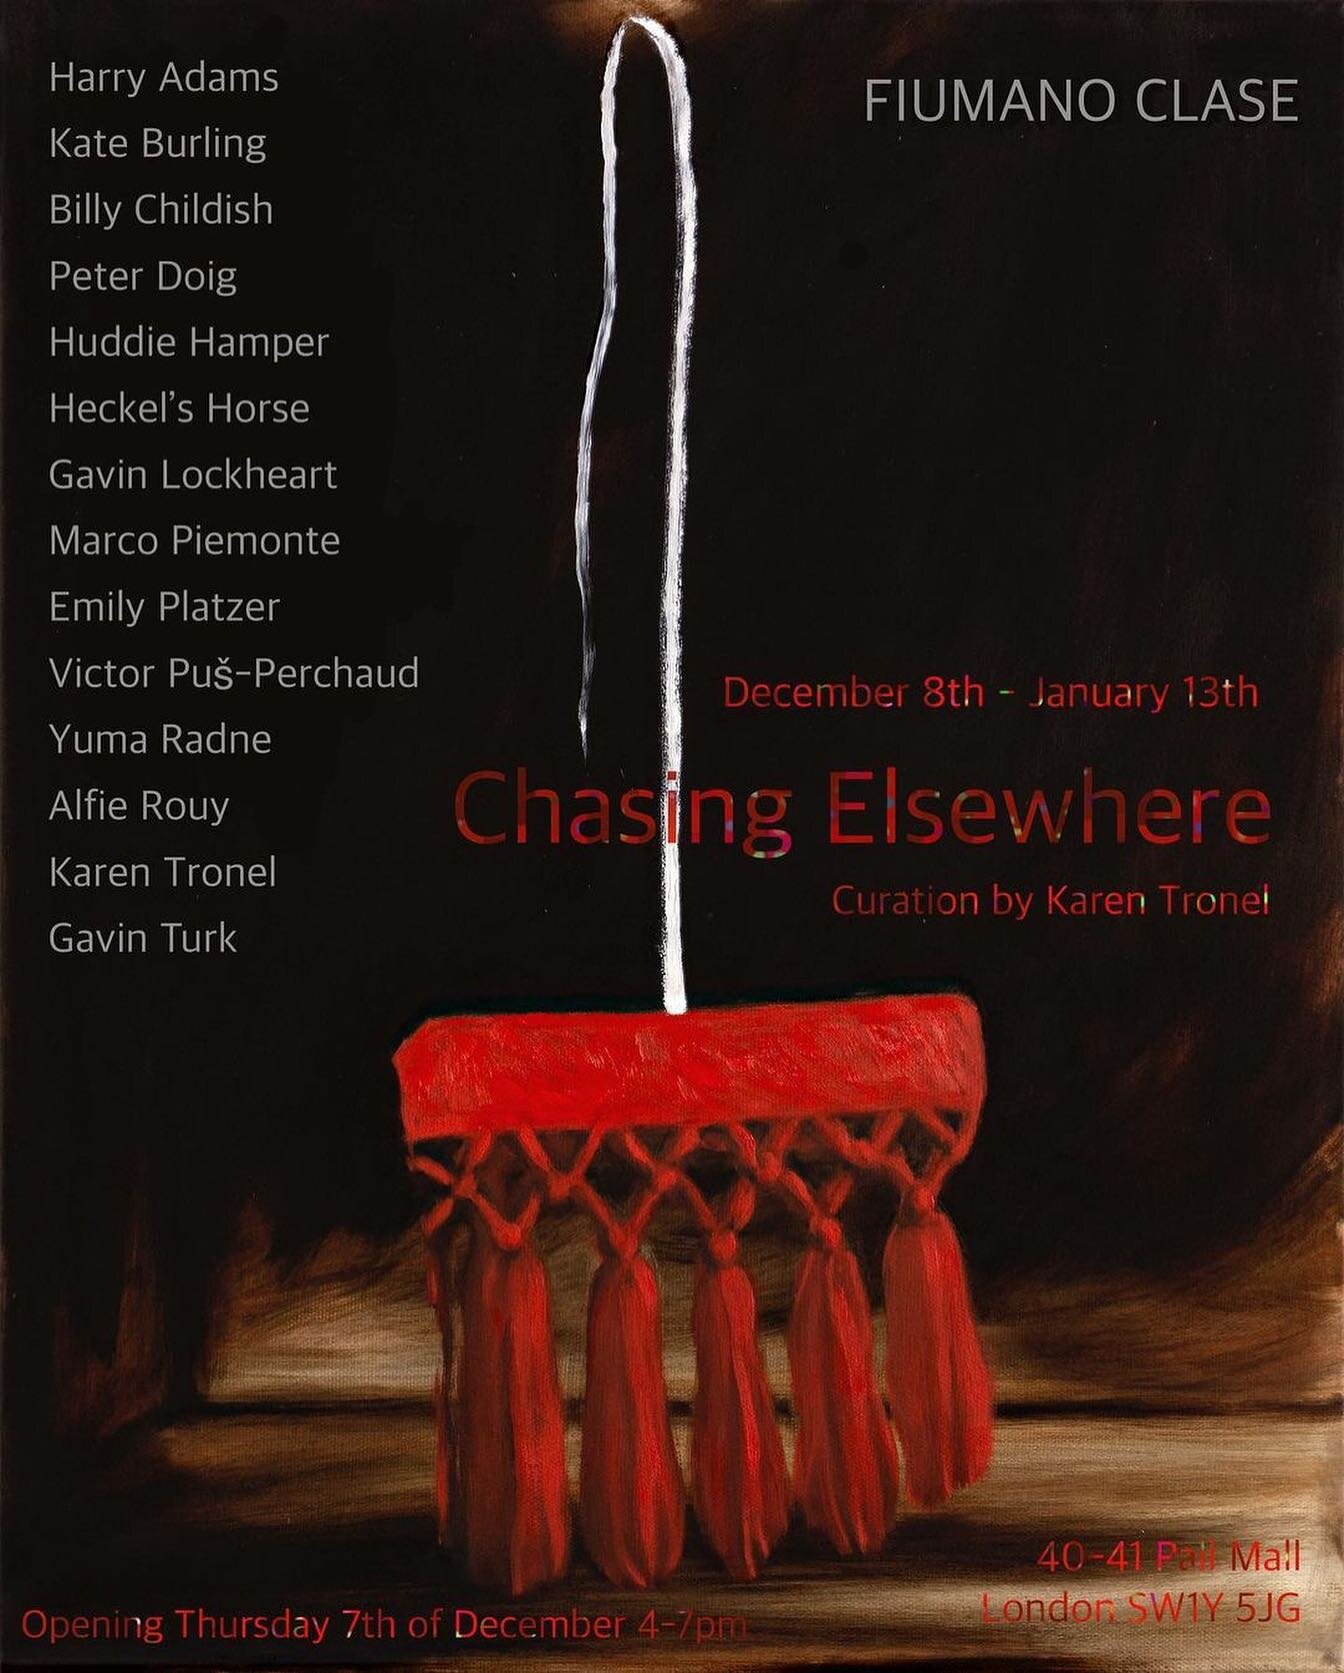 Repost &bull; @karentronel I am delighted to announce the upcoming group exhibition &ldquo;Chasing Elsewhere&rdquo; which I have had the pleasure to curate at Fiumano Clase gallery, bringing together amazing works by a truly incredible selection of a